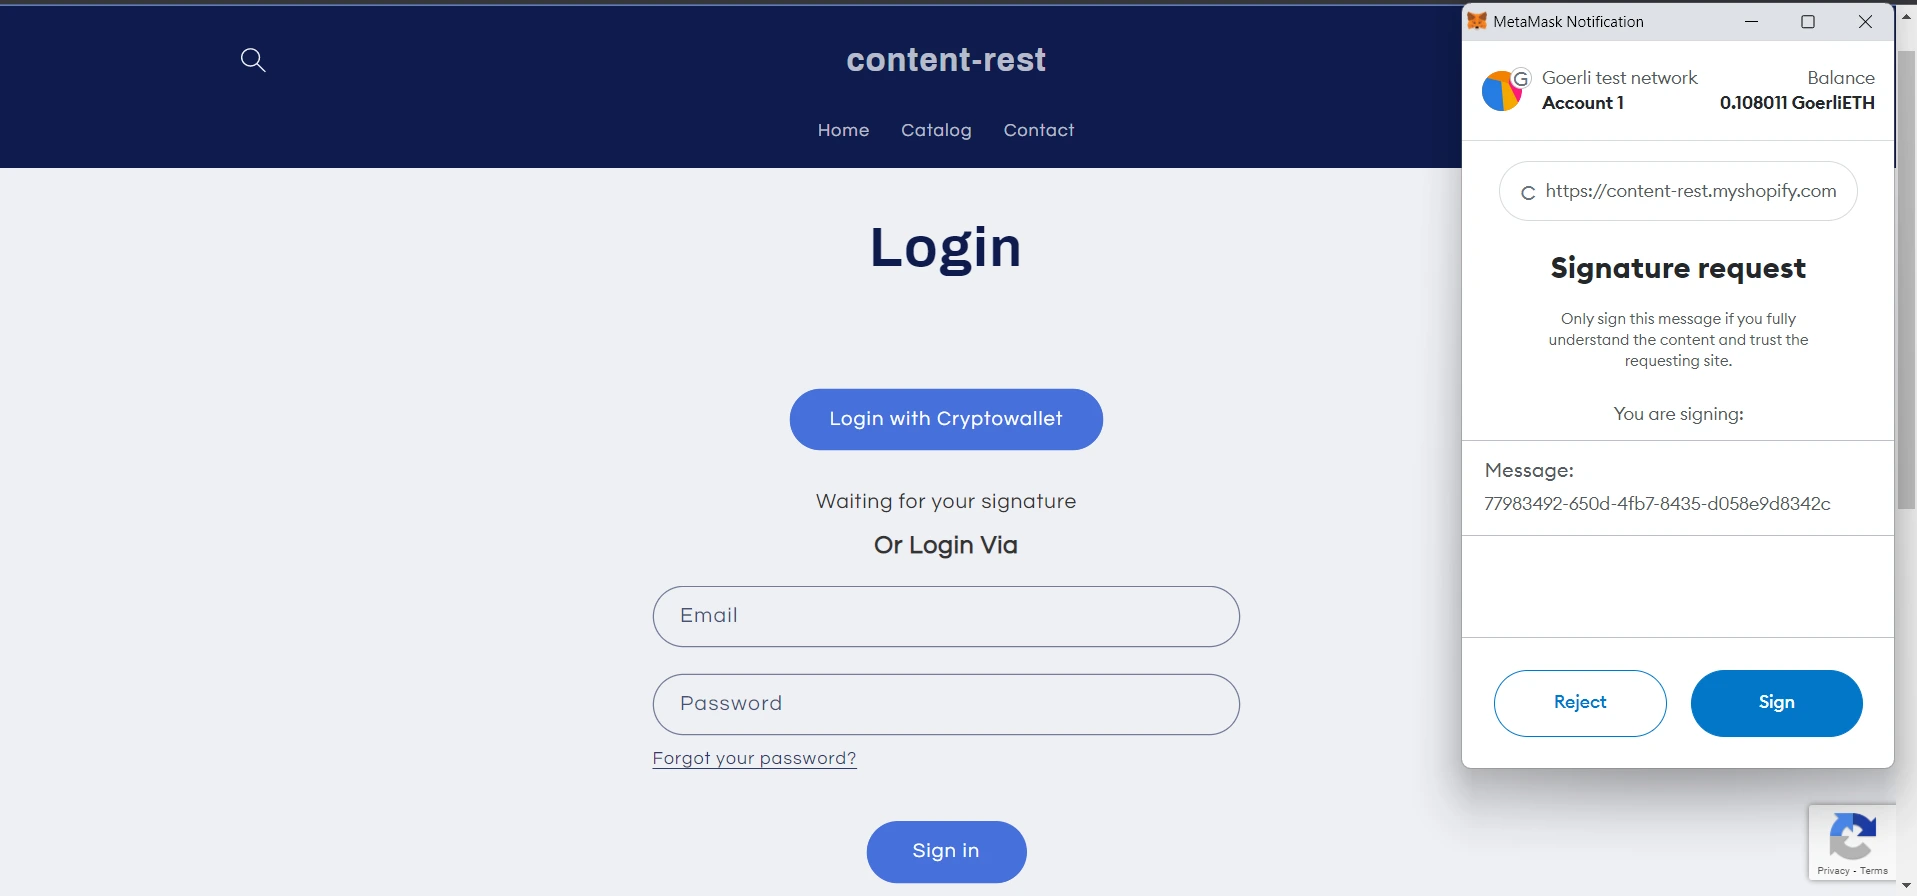 shopify content restriction application - login into metamask